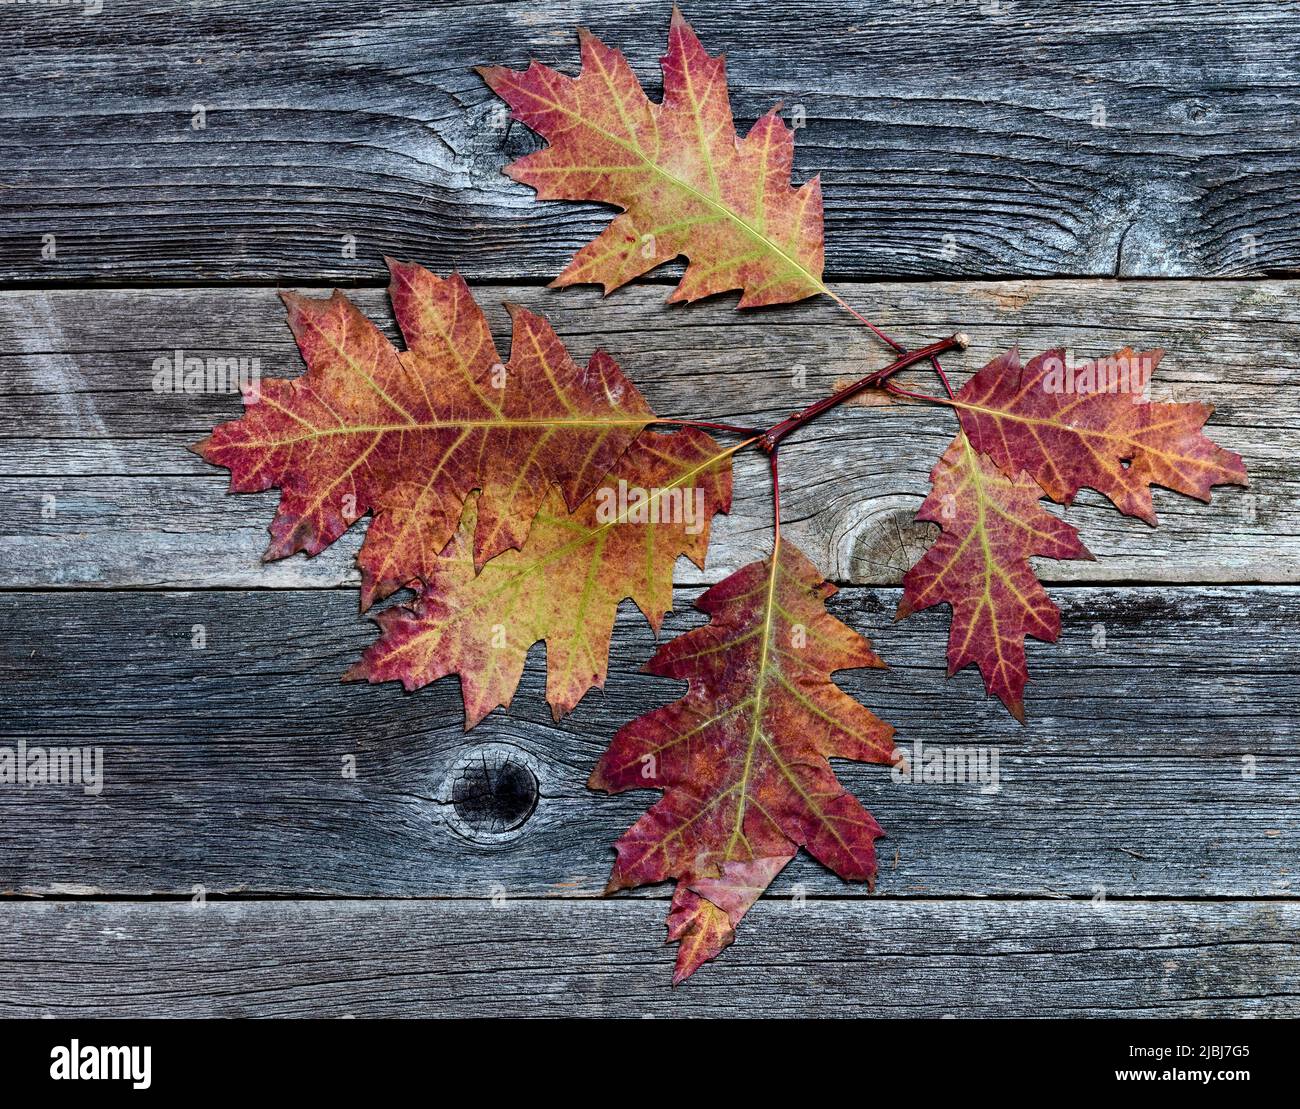 Faded oak leaves on rustic wood background for Autumn concept Stock Photo